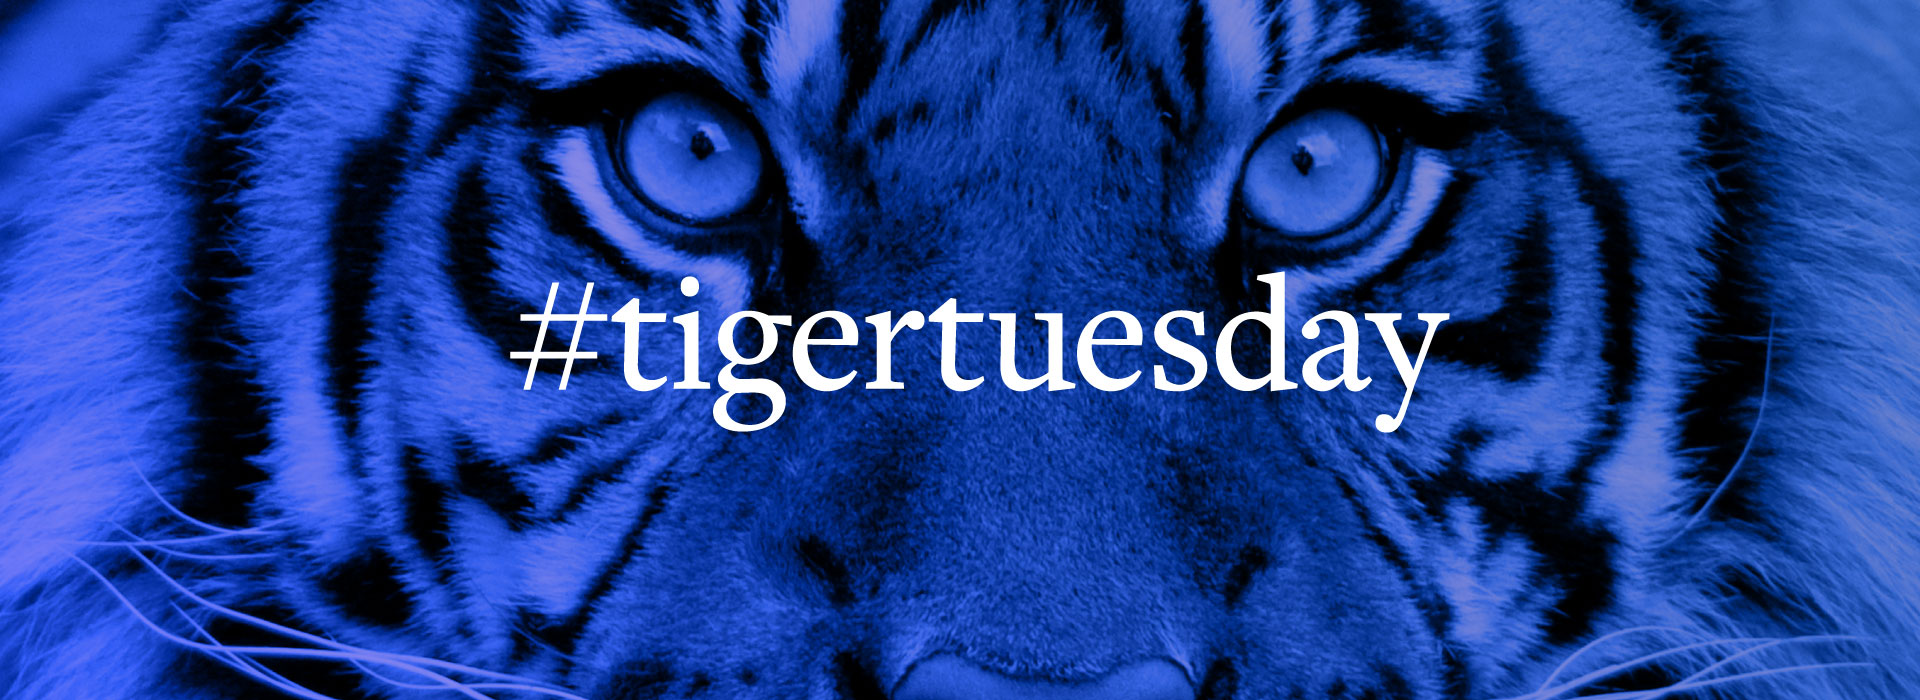 tiger tuesday